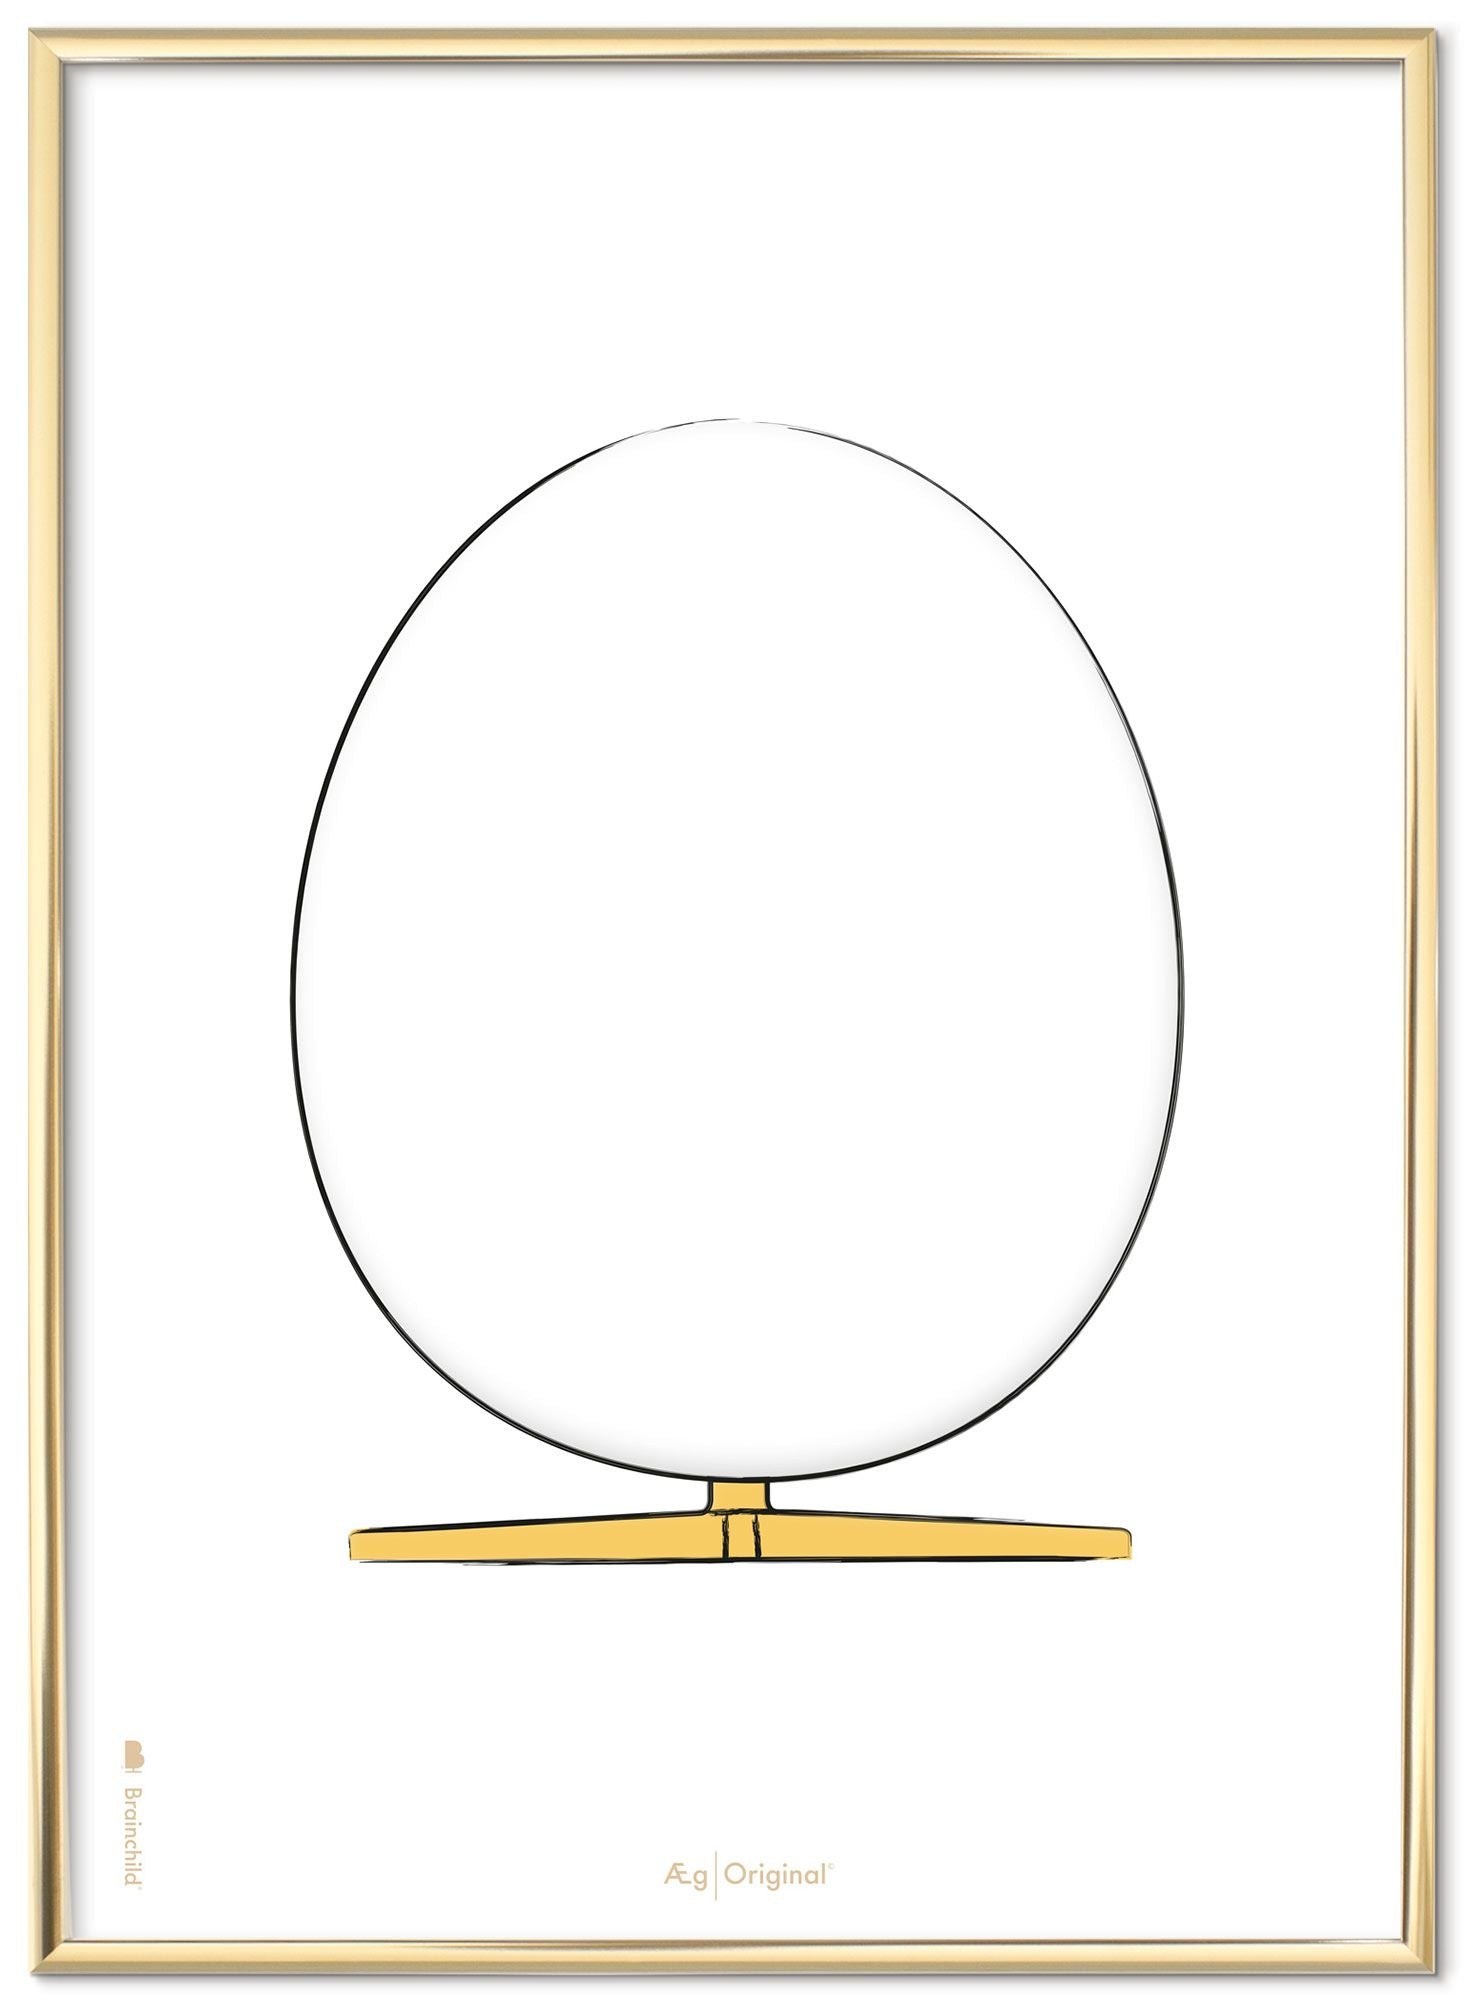 Brainchild The Egg Design Sketch Poster Frame Made Of Brass Colored Metal 30x40 Cm, White Background